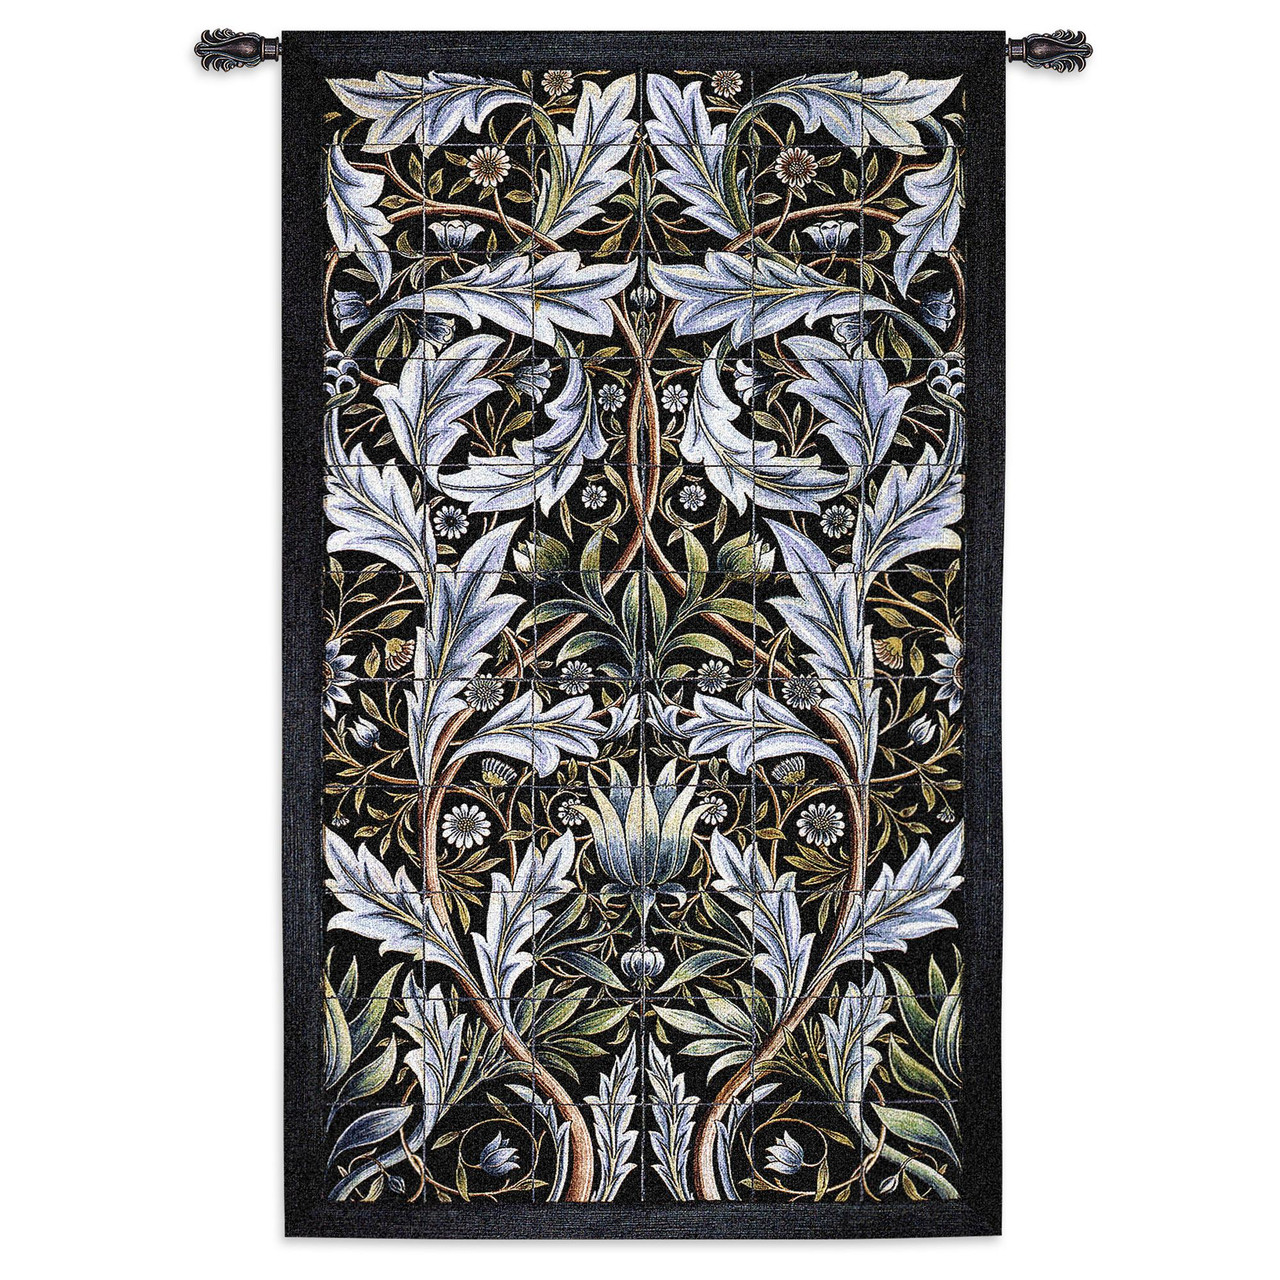 Celtic Irish Cross One Thousand Blessings Woven Tapestry Wall Art Hanging Celtic Tribal Knot Design 100% Cotton USA Size 53x40 - 2